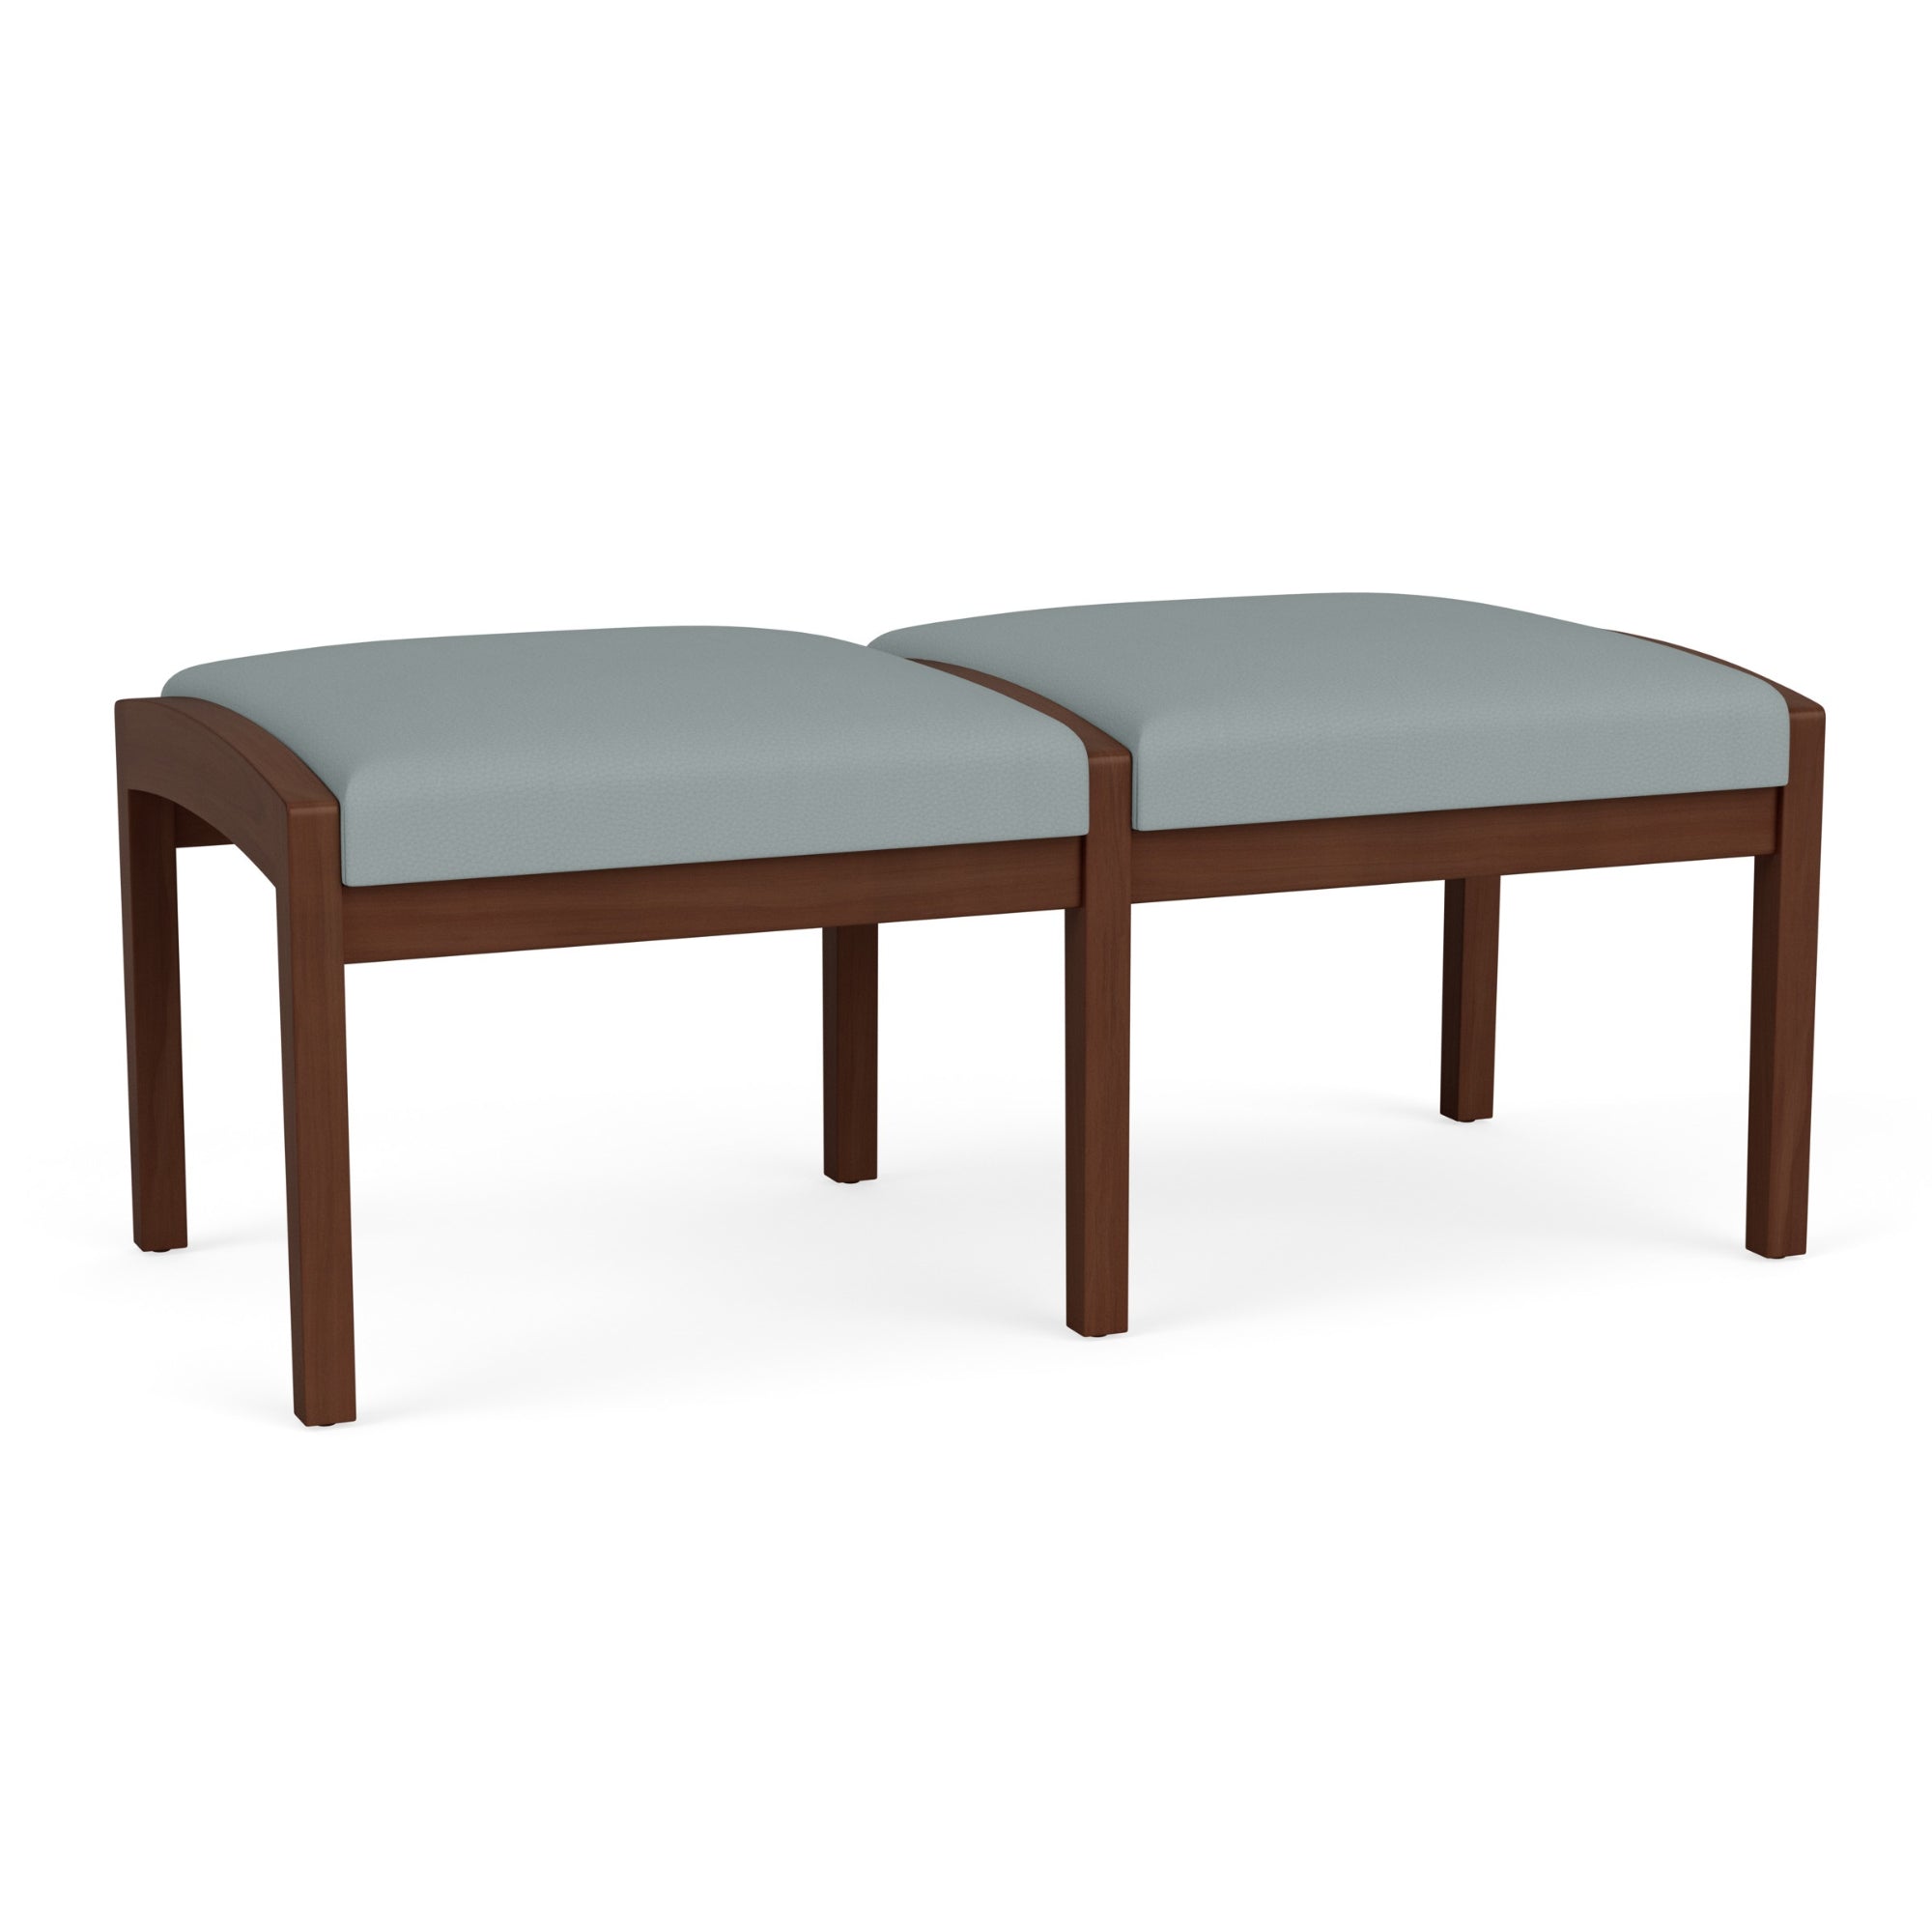 Lenox Wood Collection Reception Seating, 2 Seat Bench, Standard Vinyl Upholstery, FREE SHIPPING